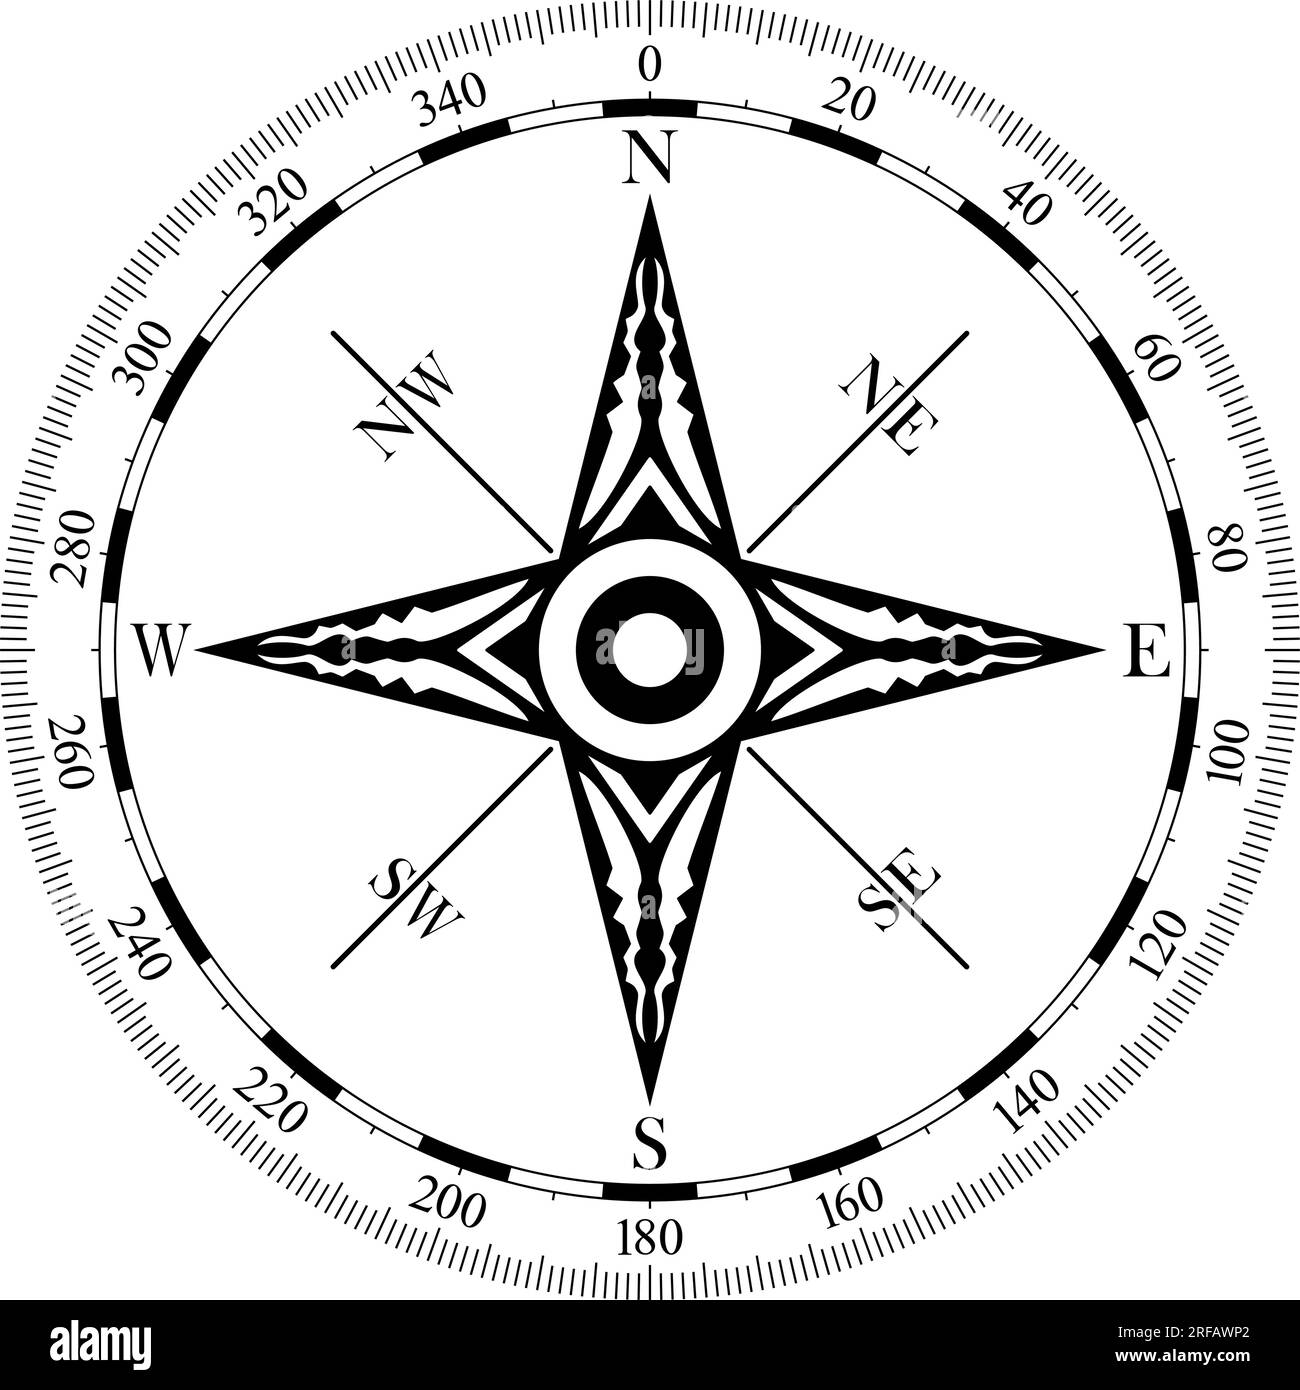 https://c8.alamy.com/comp/2RFAWP2/compass-rose-vector-with-ornament-and-scale-eight-directions-marine-nautical-or-trekking-navigation-symbol-or-useable-in-a-geographic-map-2RFAWP2.jpg